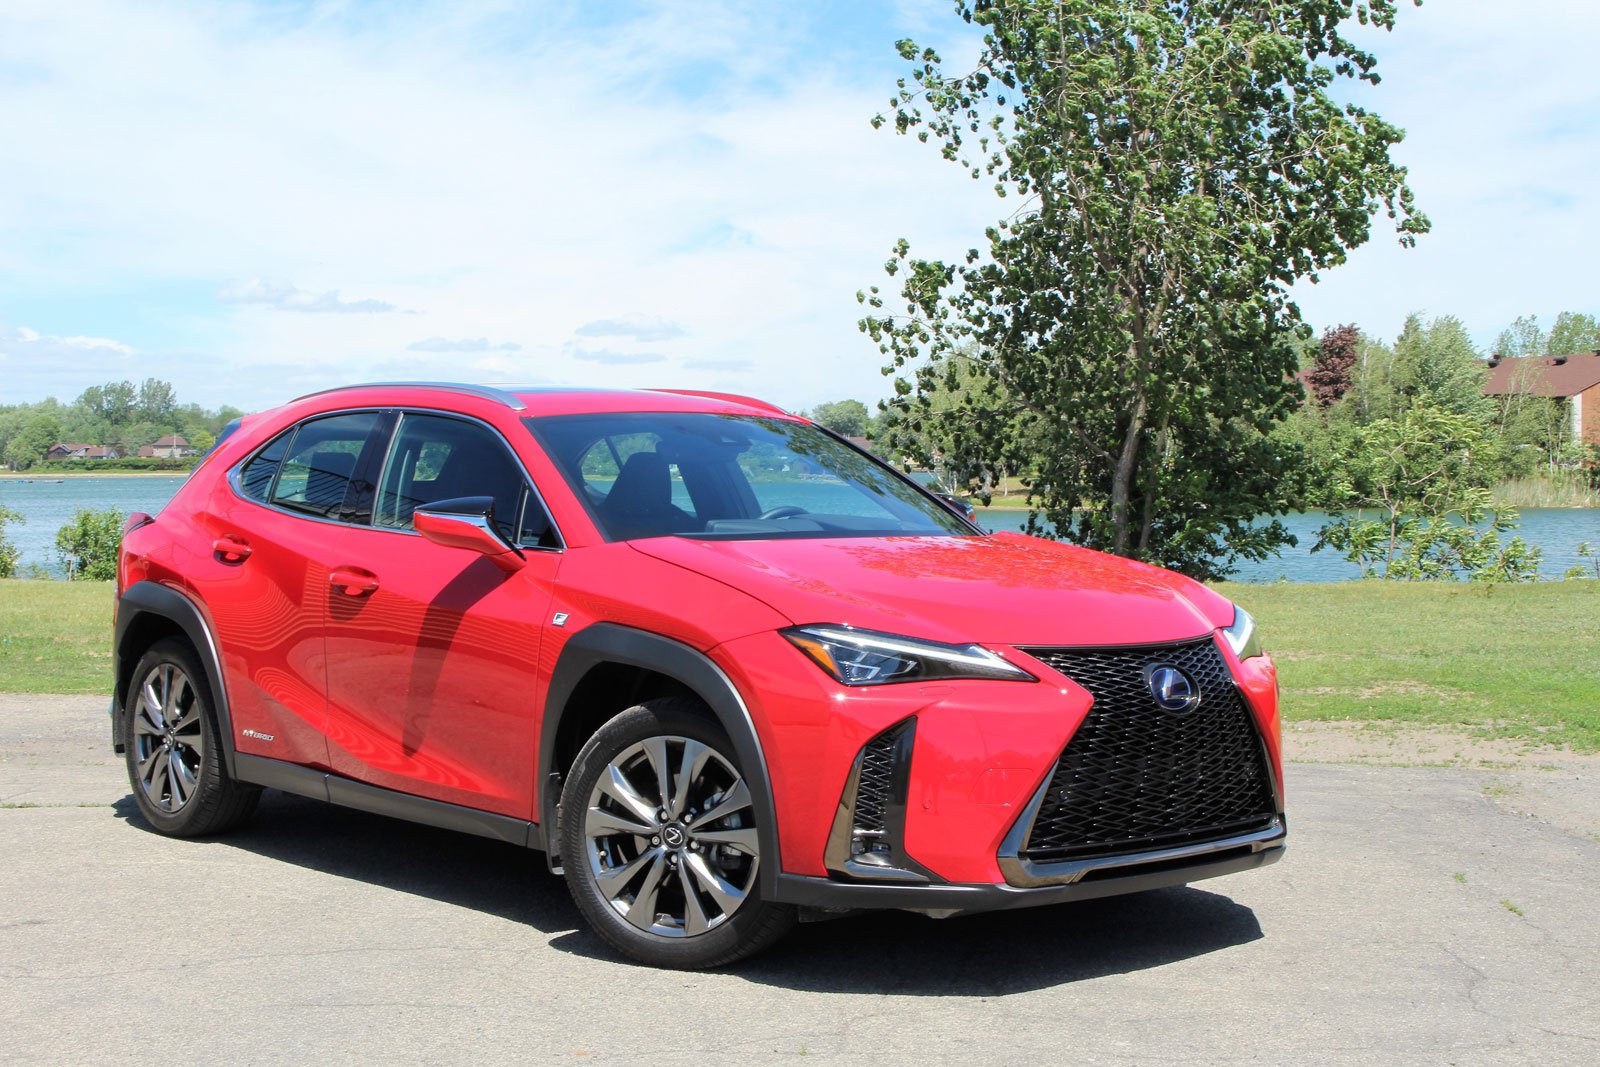 Should You Buy a 2020 Lexus UX? - Motor Illustrated